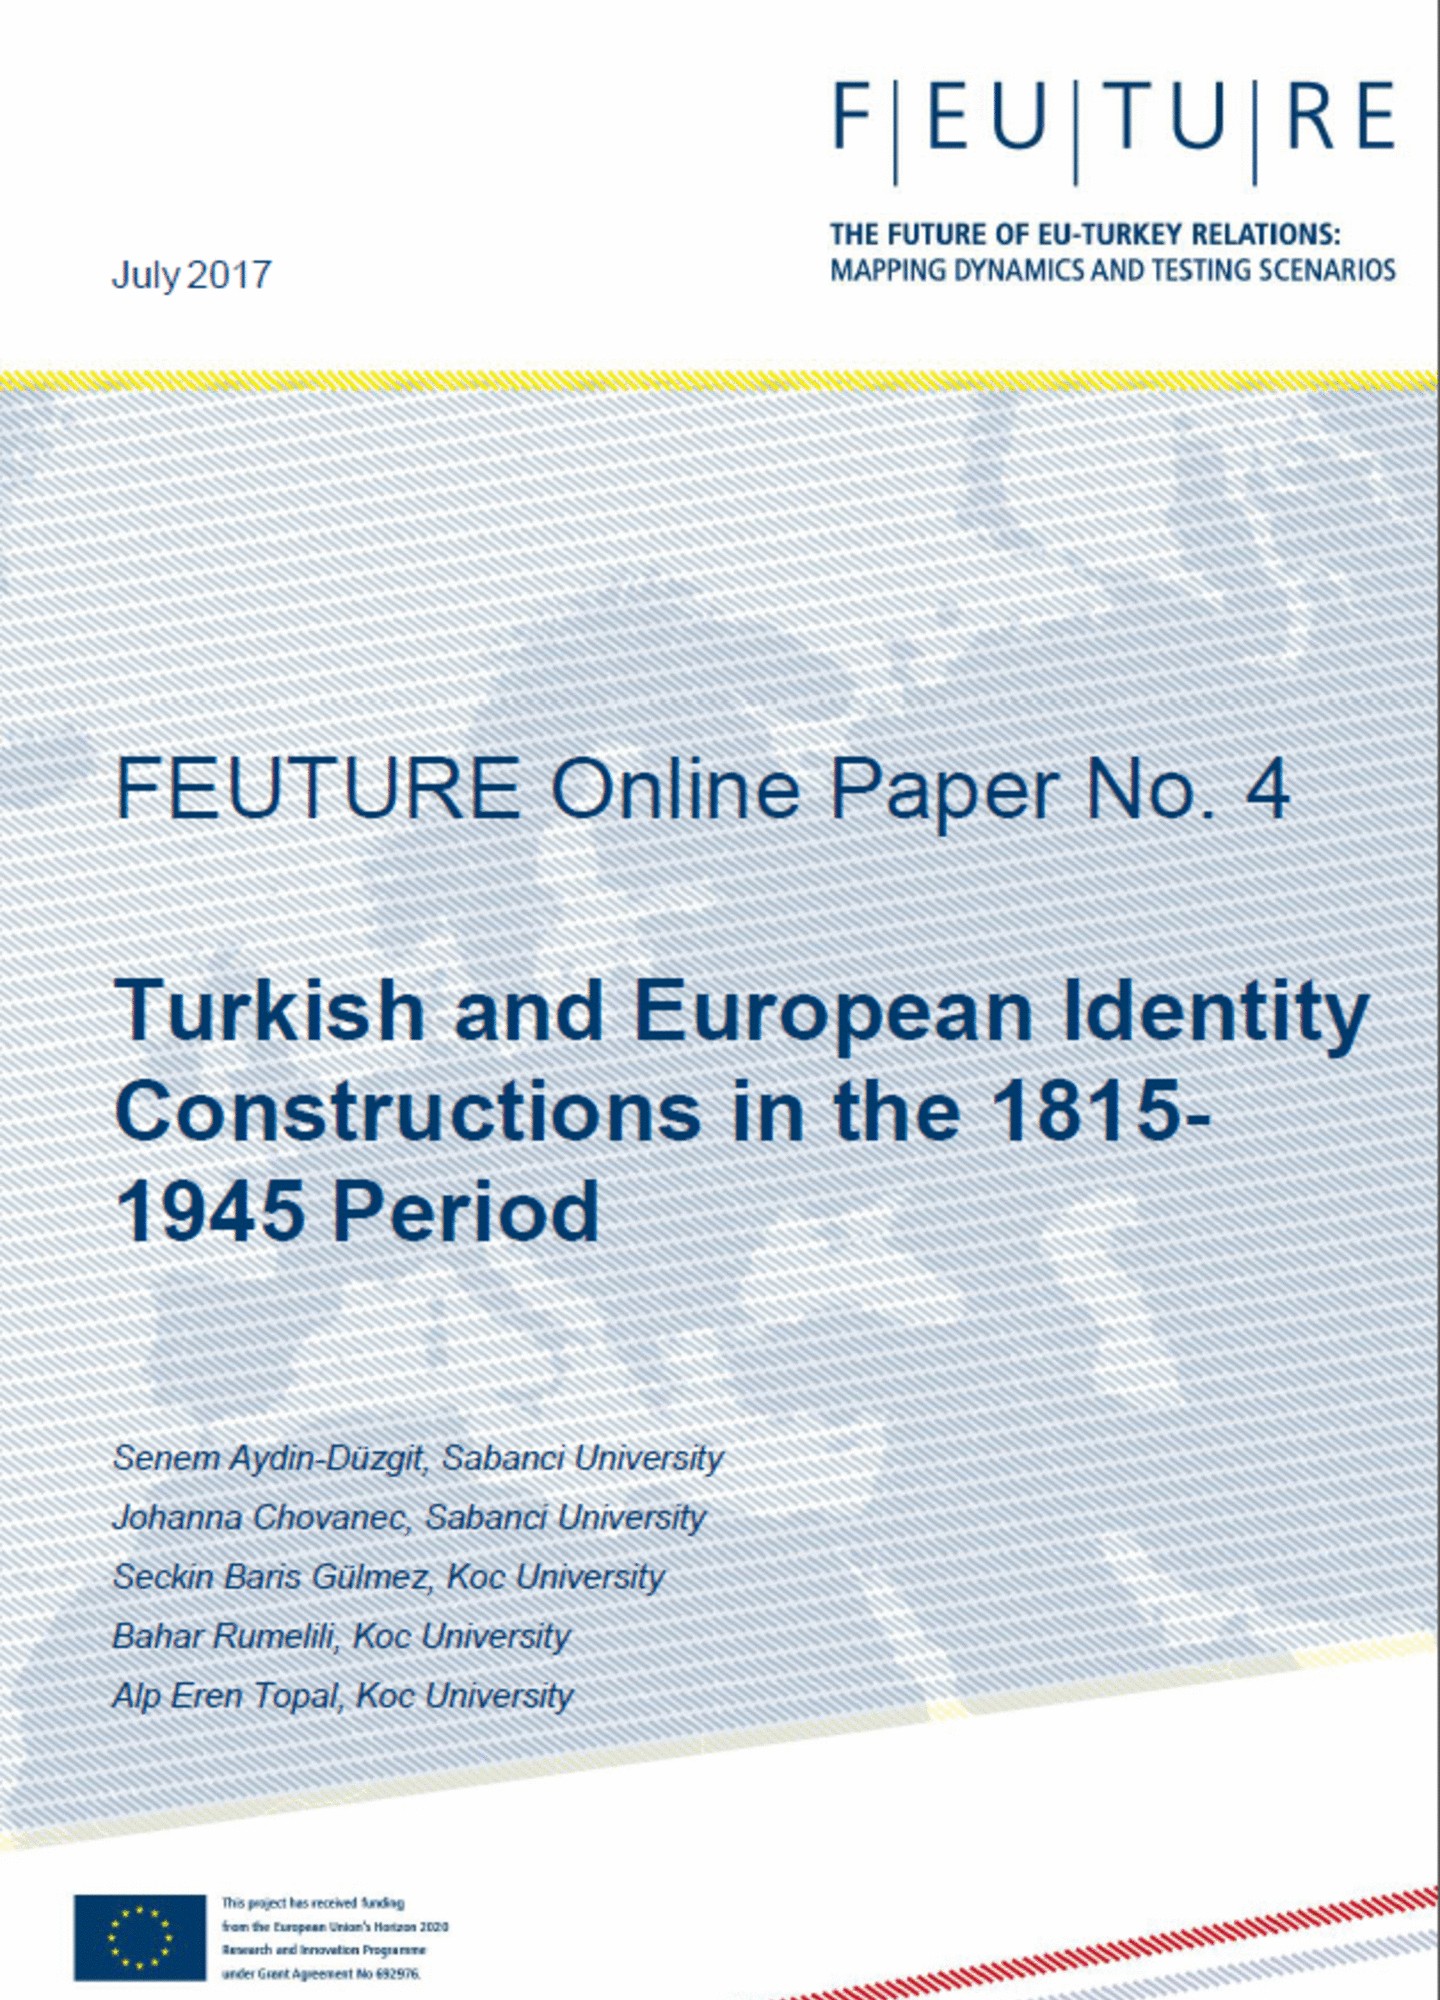 Turkish and European Identity Constructions in the 1815-1945 Period